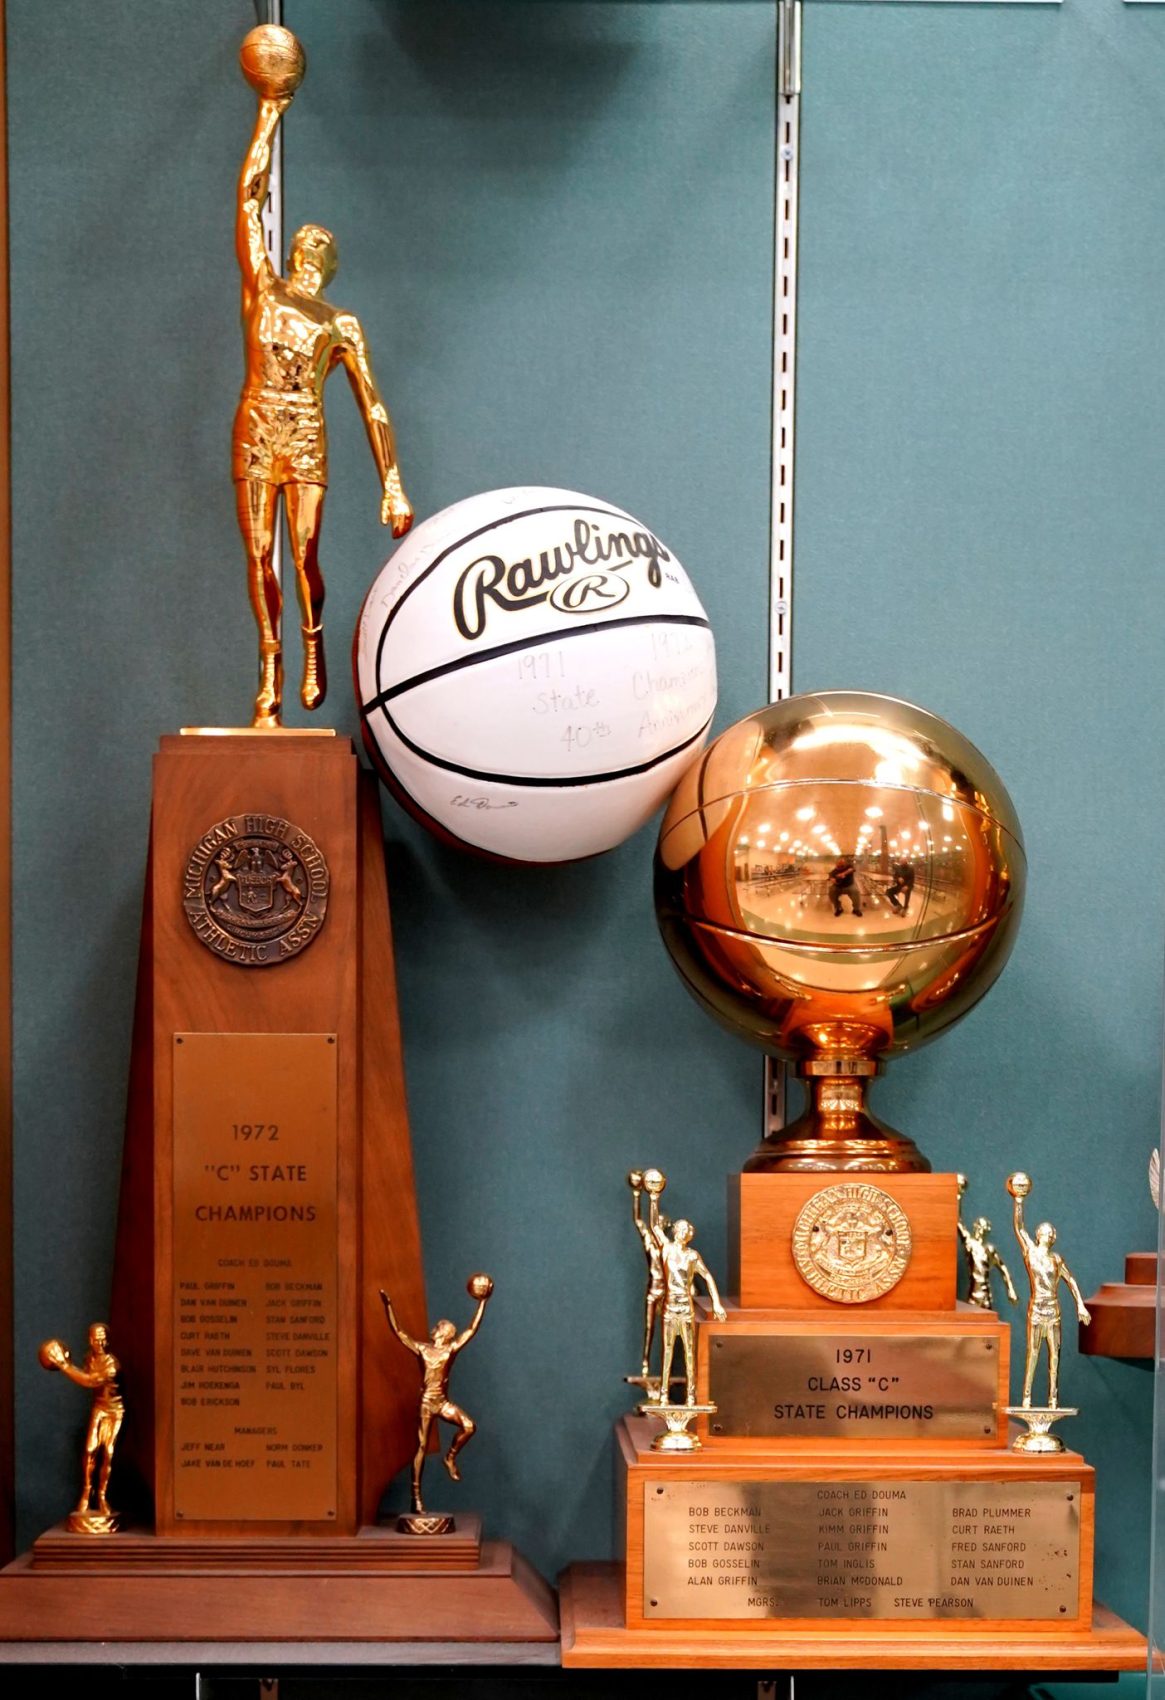 A golden anniversary of basketball glory for the Shelby Tigers